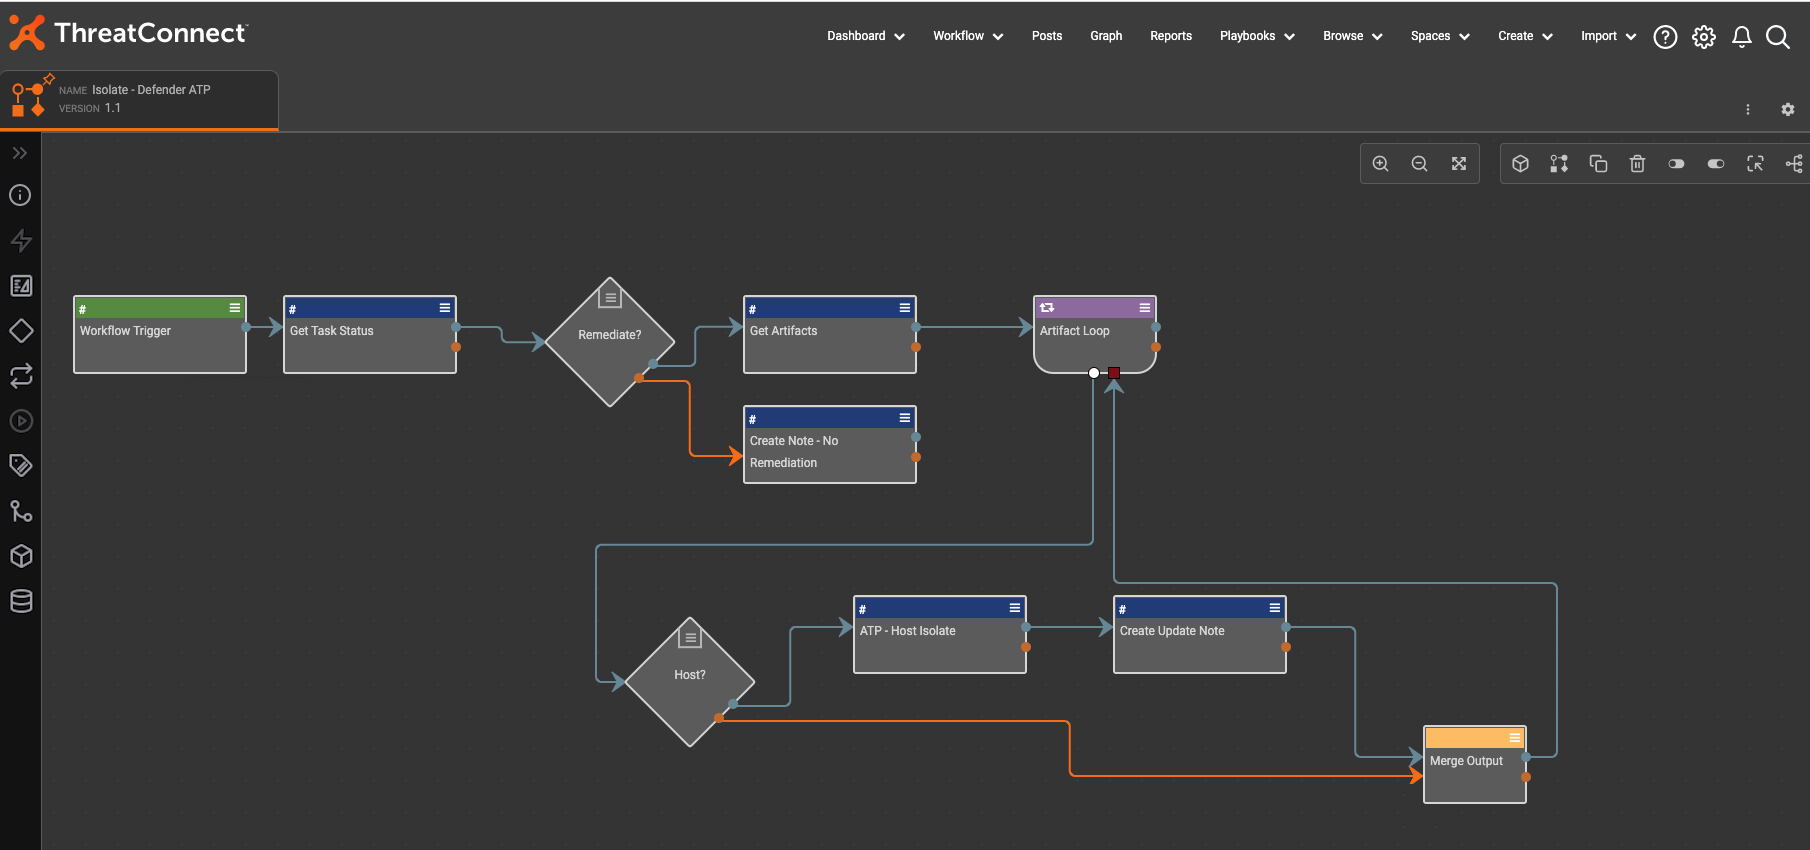 a ThreatConnect dashboard with a flow chart